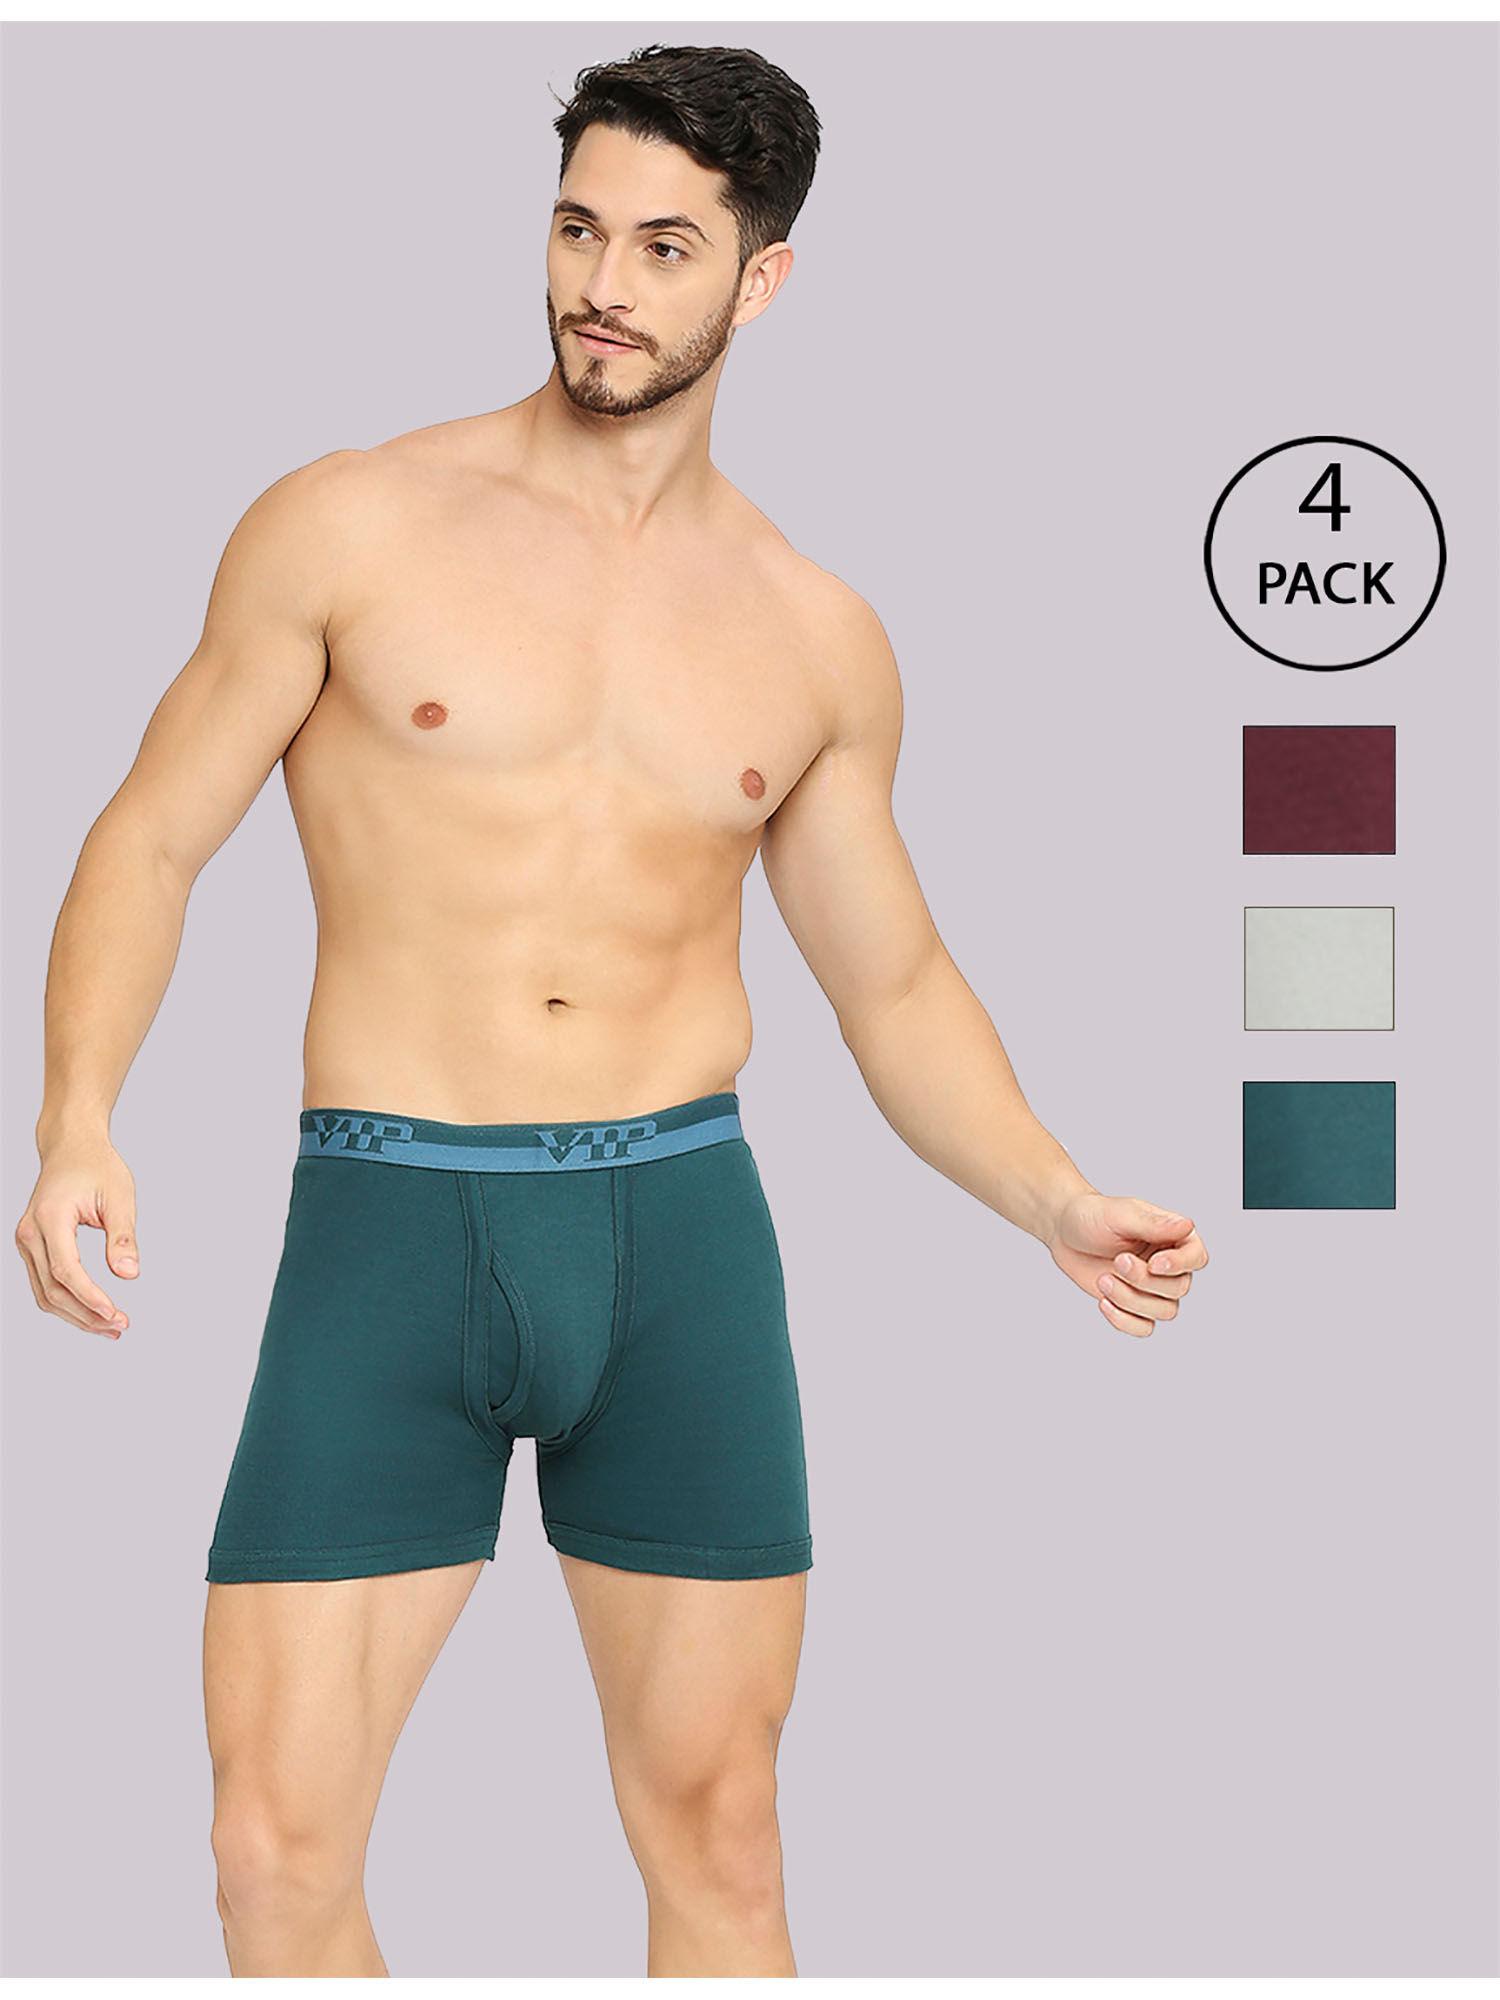 ultra men's essential cotton trunks in assorted colors (pack of 4)